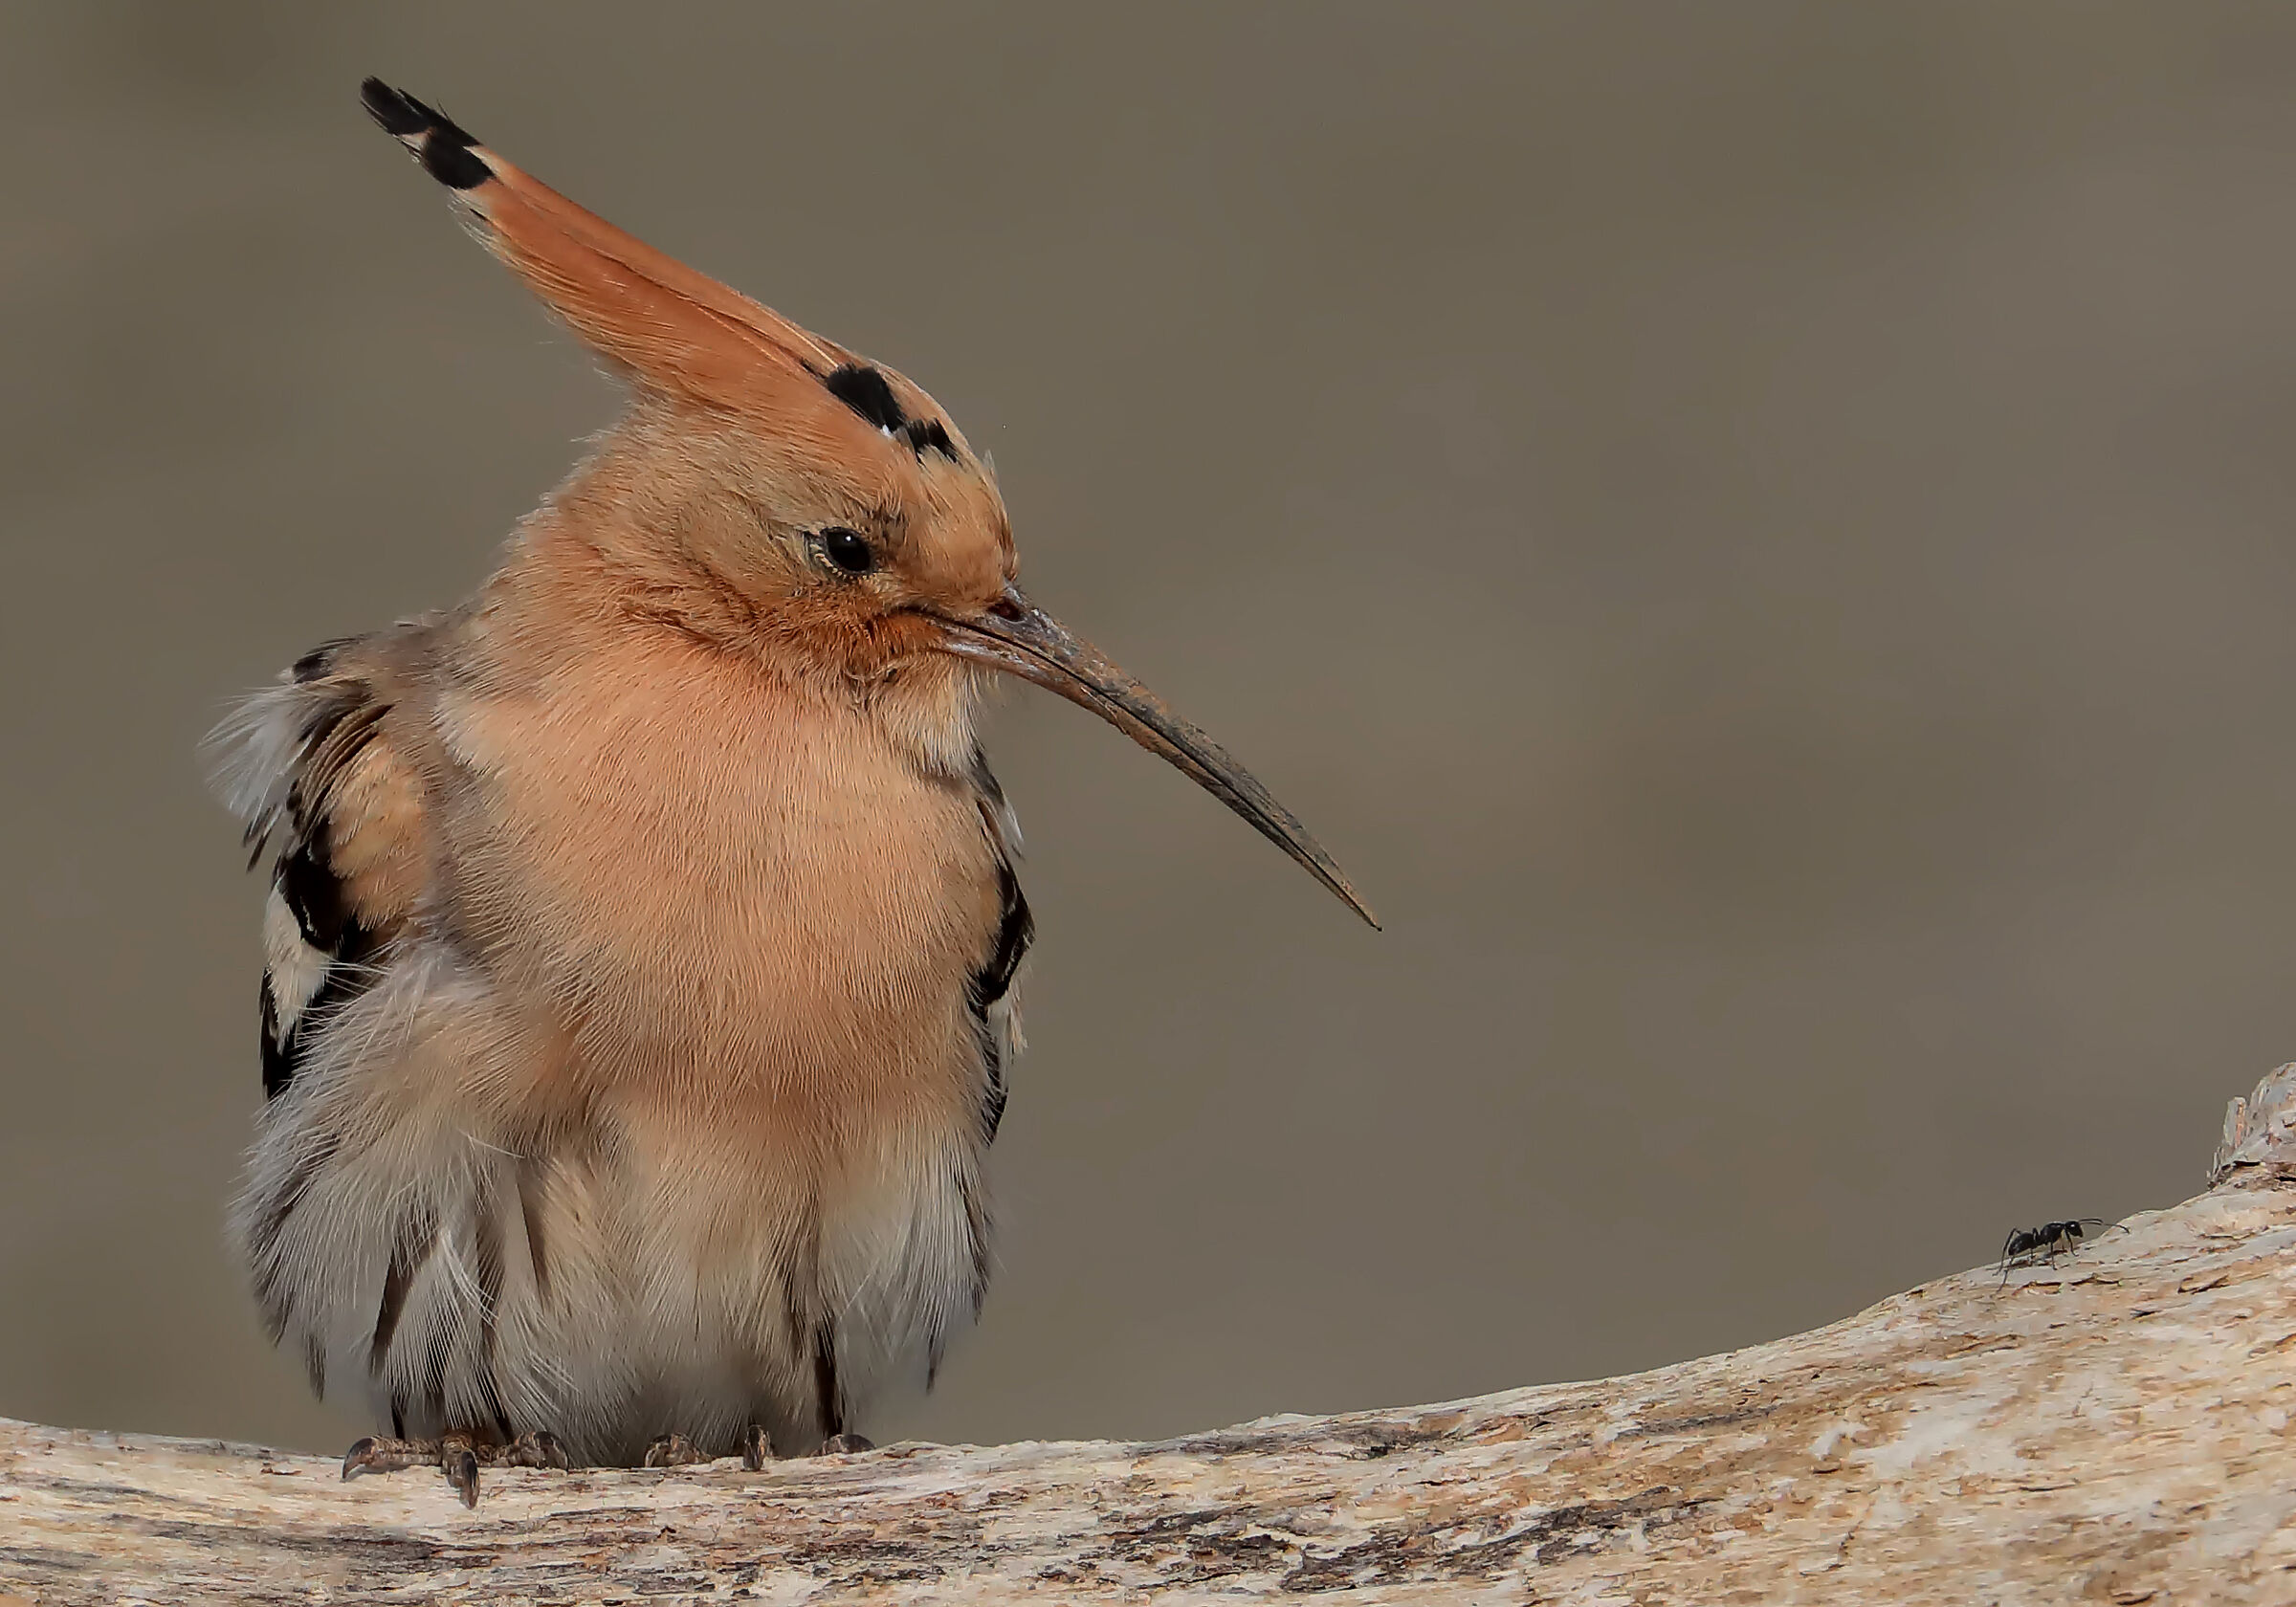 The hoopoe and the ant...